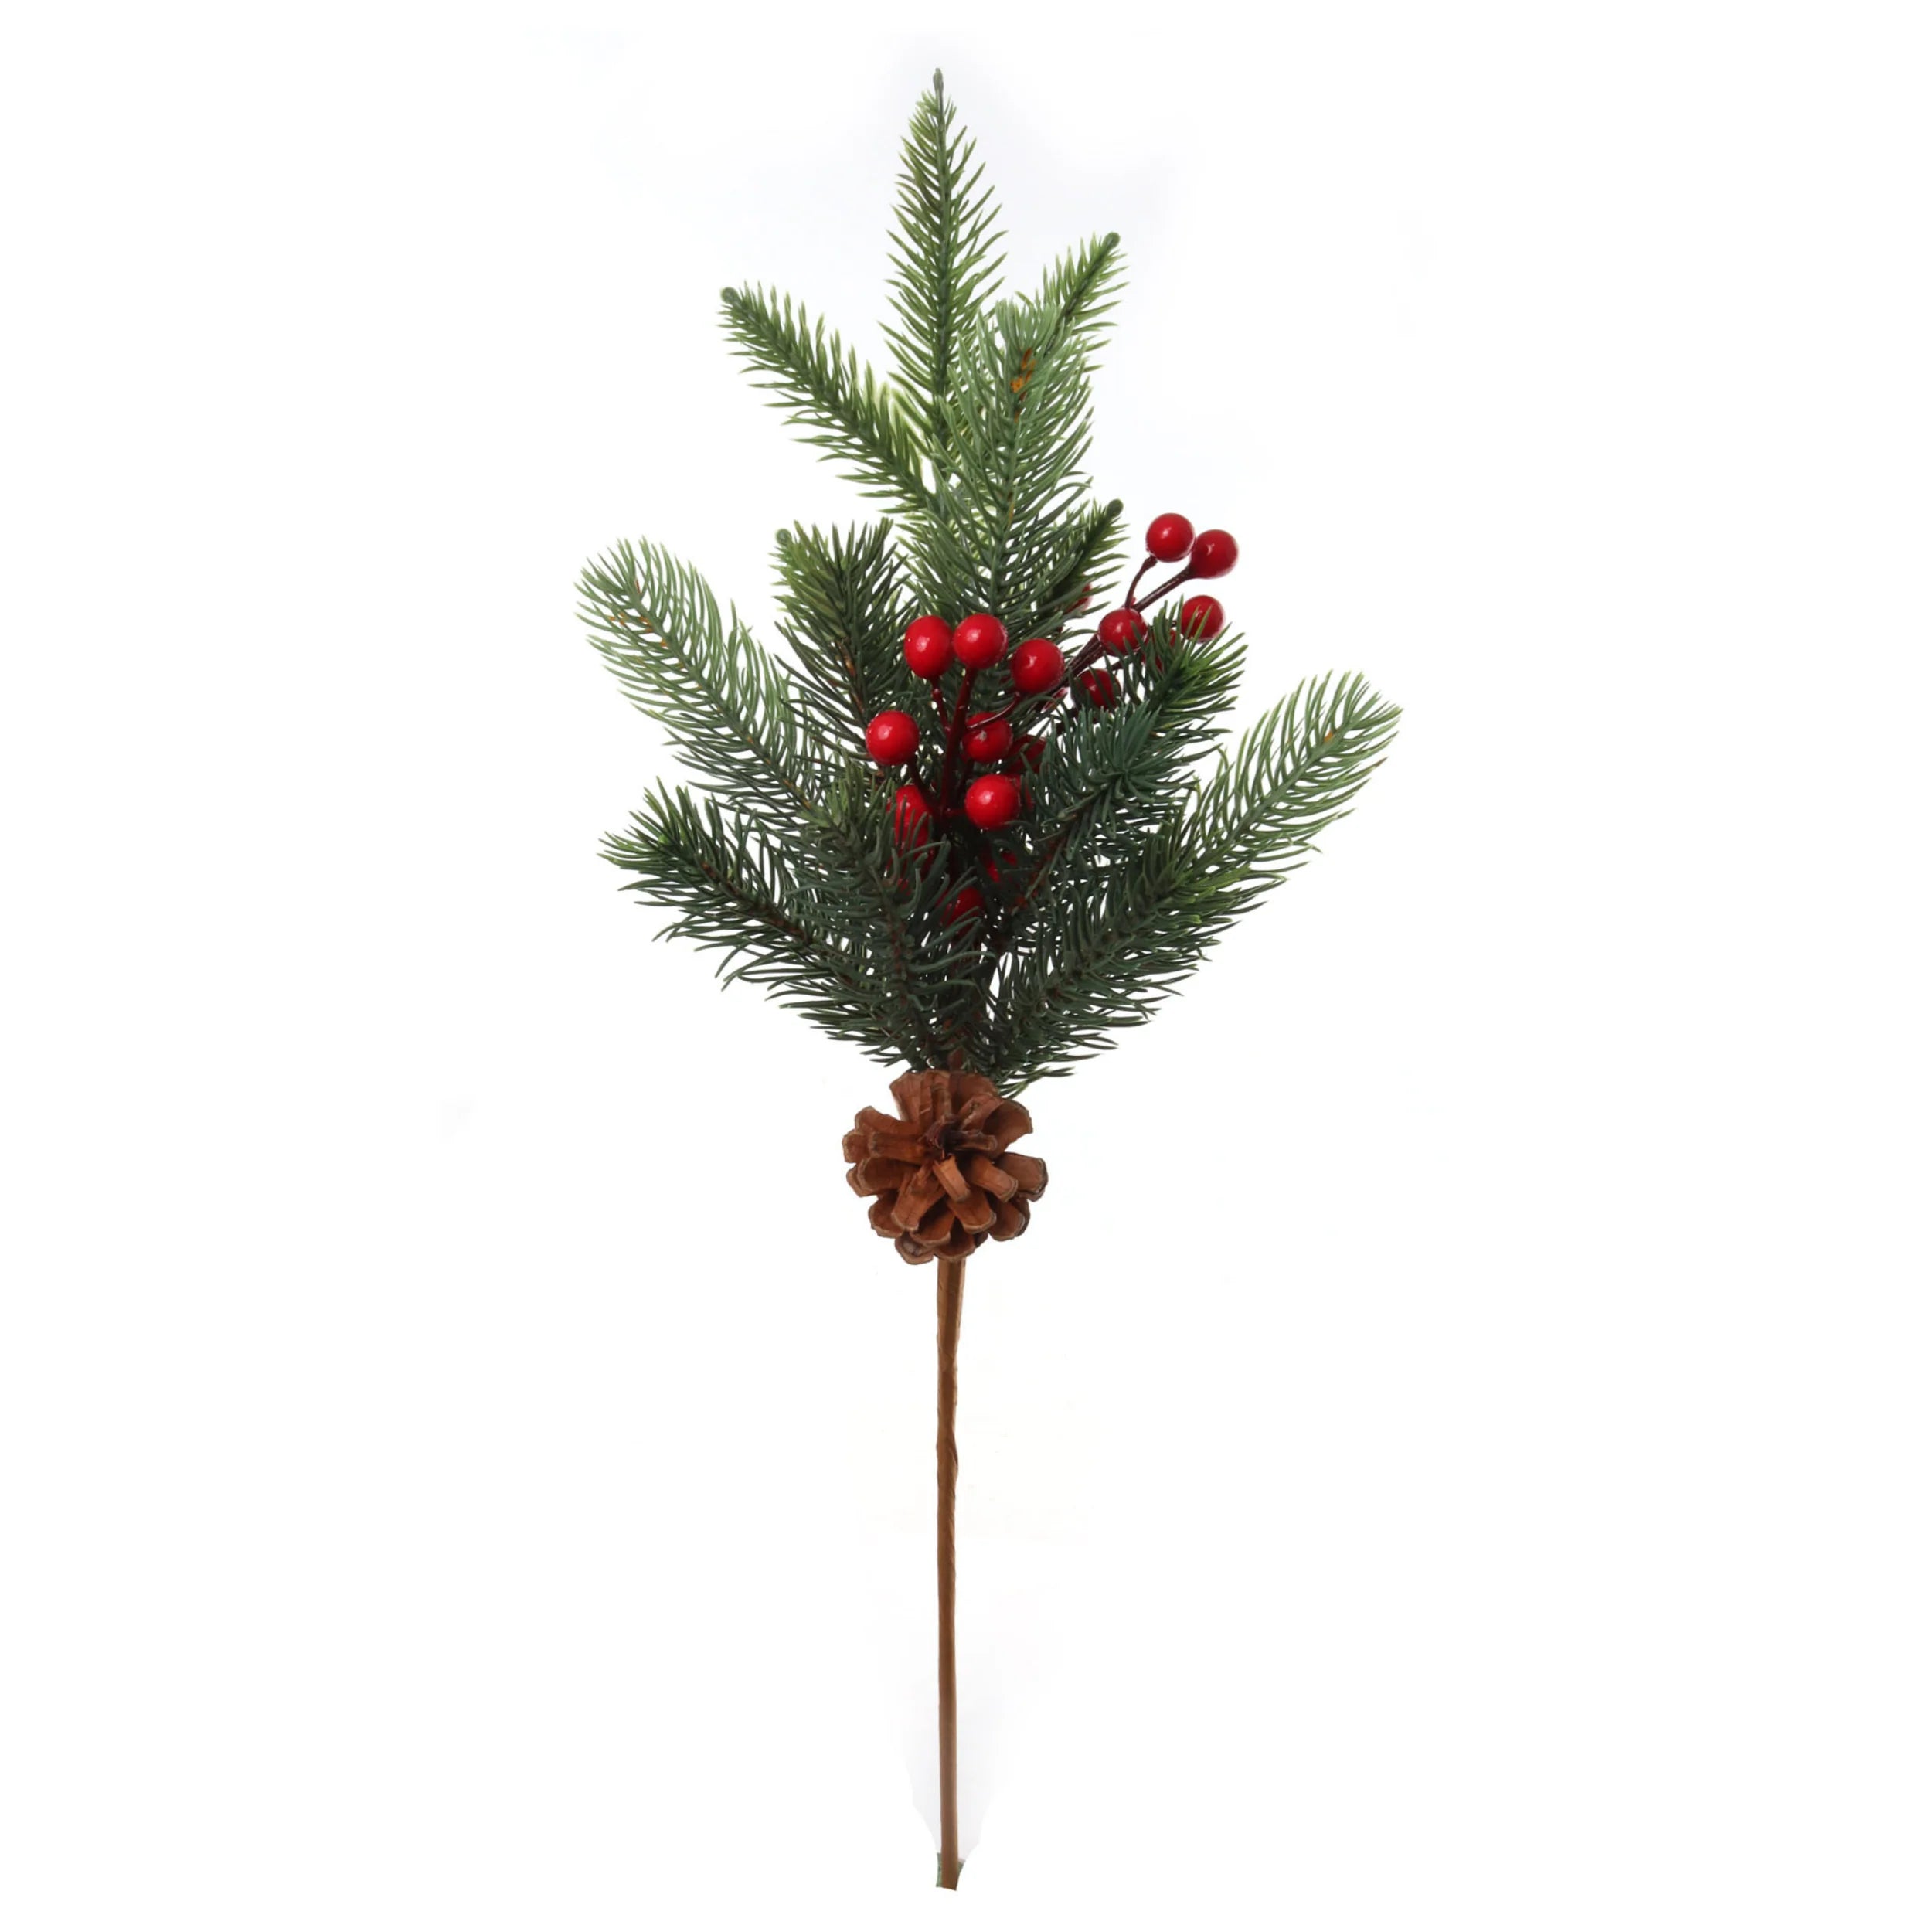 19" Pine Pick with Pine Cones & Red Berries